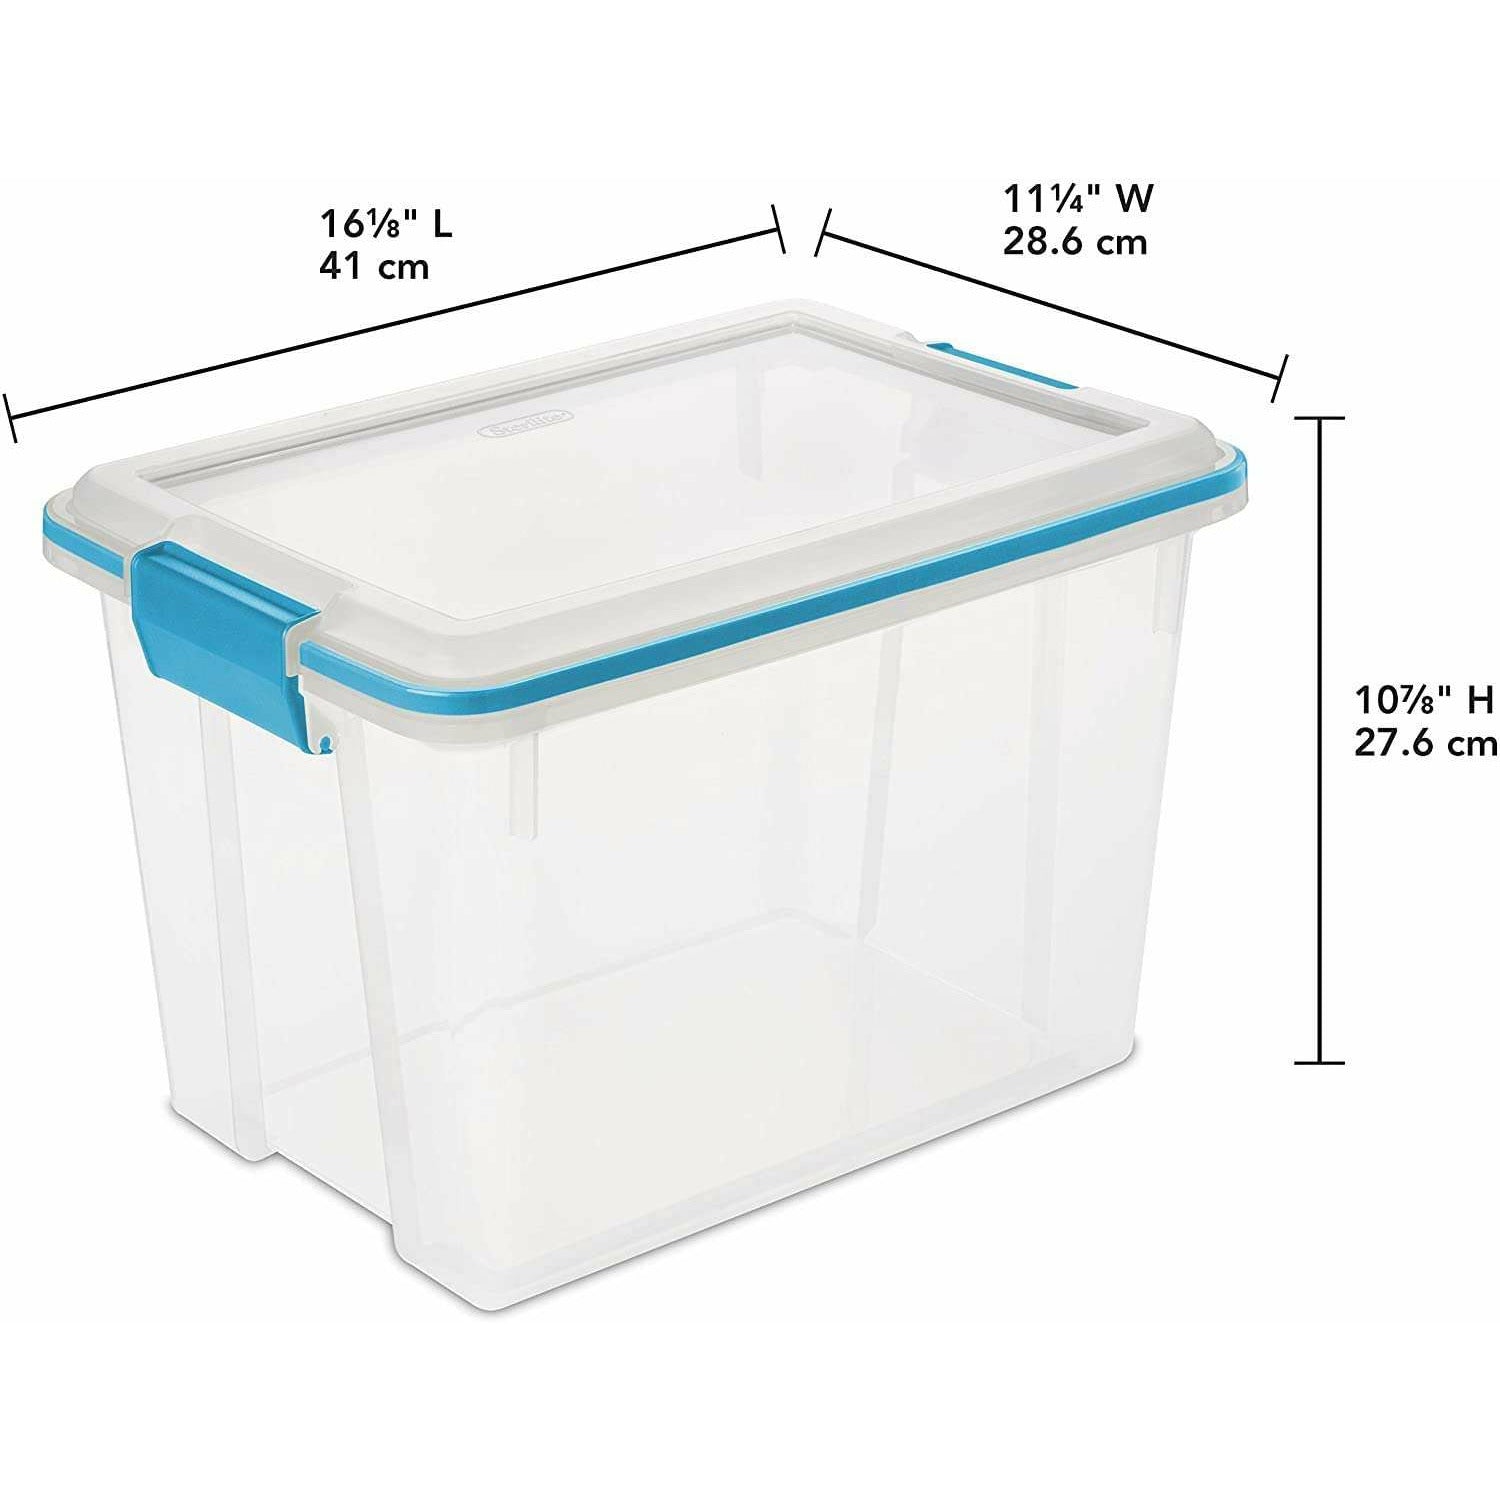 Sterilite 54 Quart Clear Gasket Box with Blue Latches & Gasket 